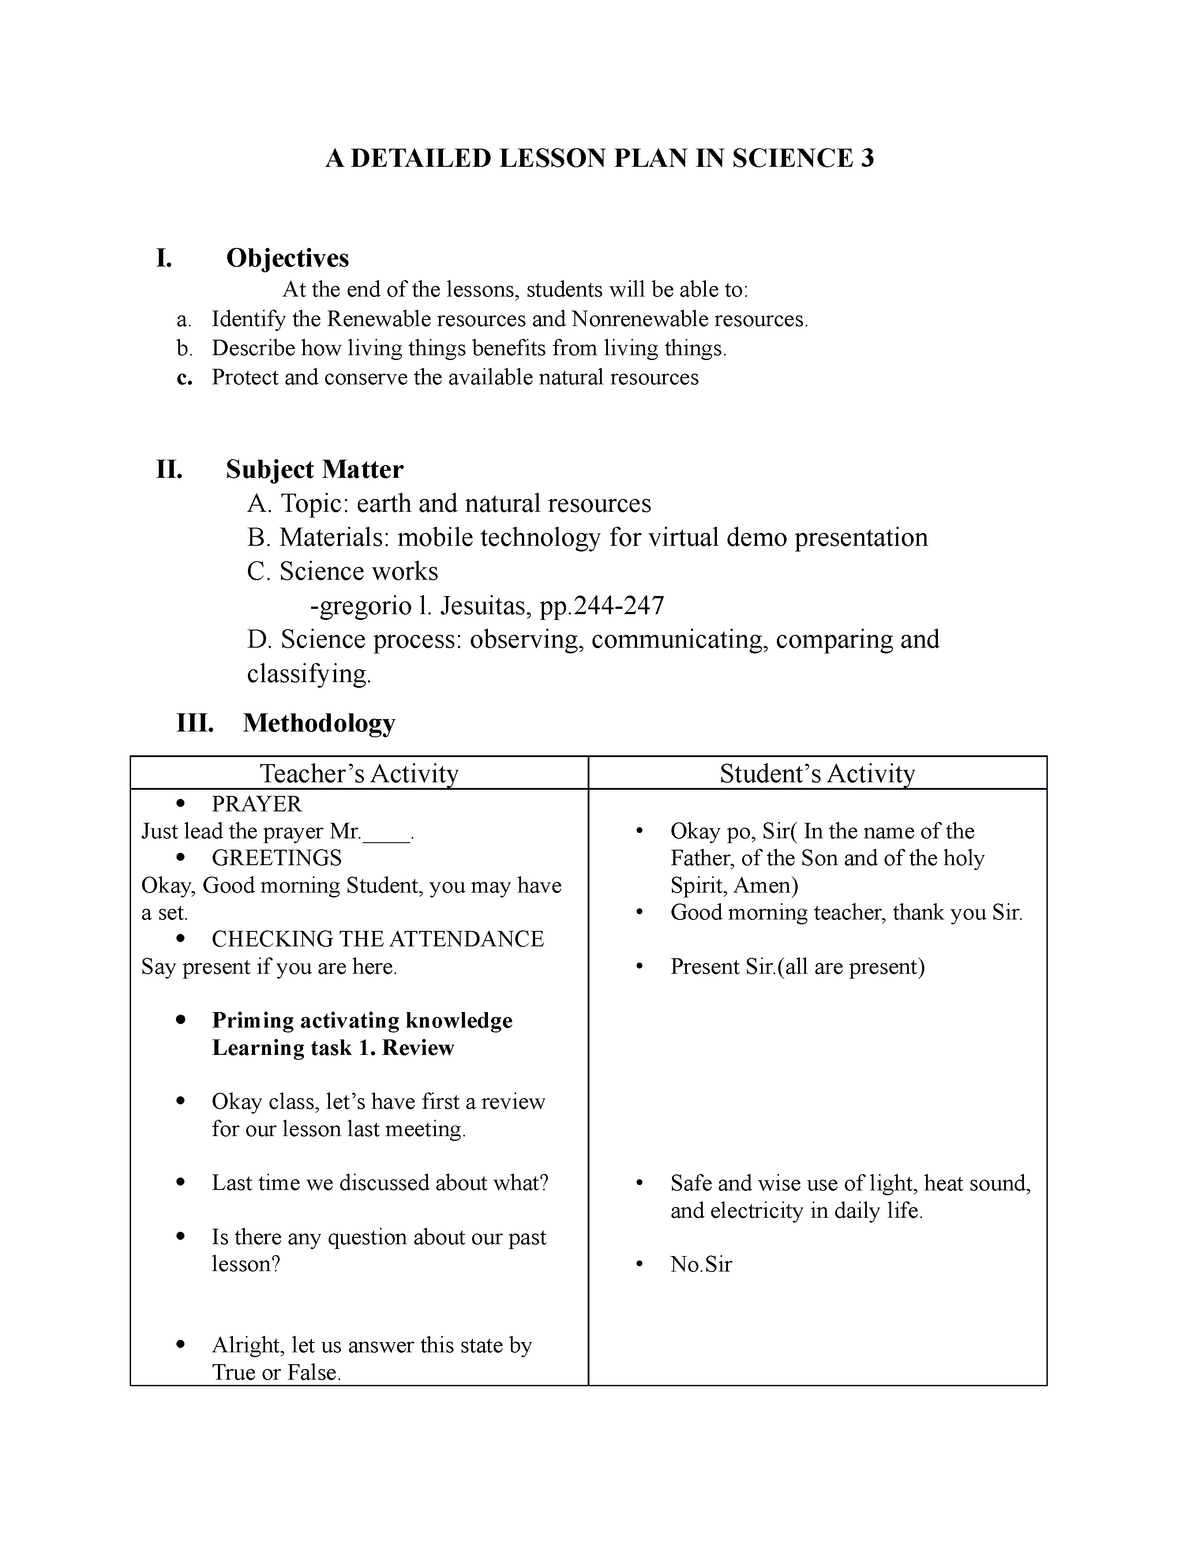 A Detailed Lesson Plan In Science 3 A Detailed Lesson Plan In Science